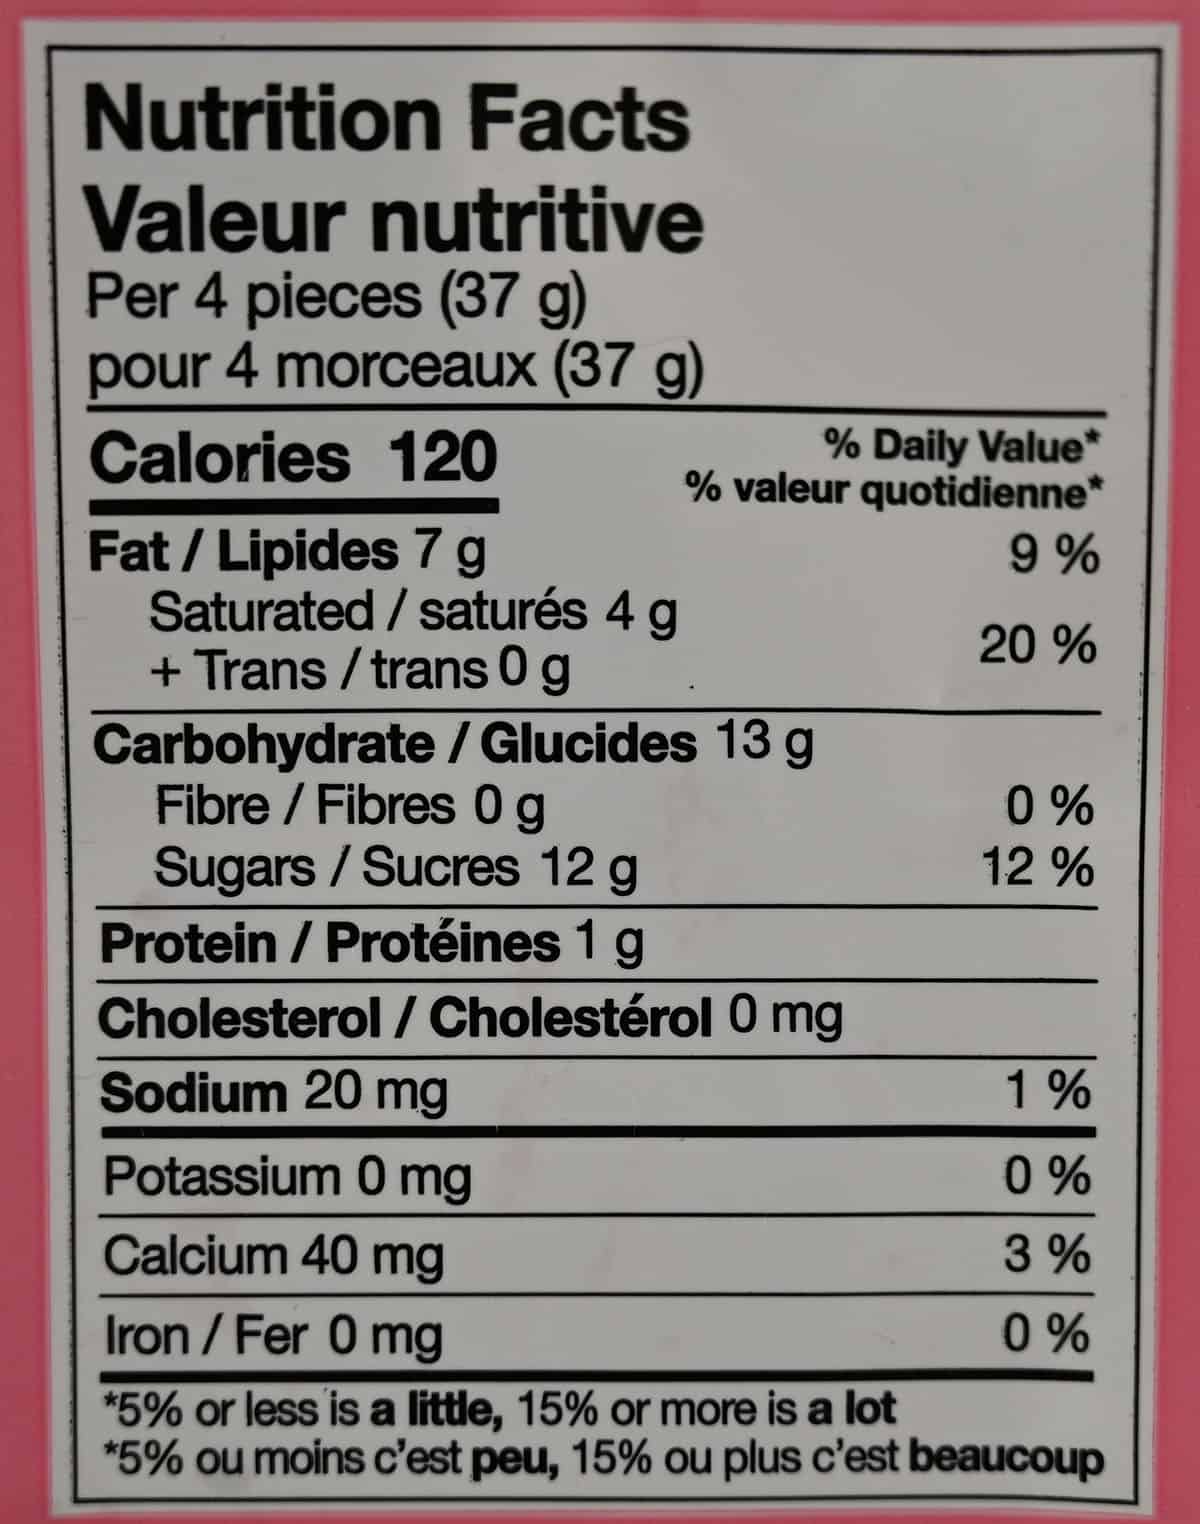 Costco Tru Fru Frozen Chocolate Covered Strawberries nutrition facts from bag.